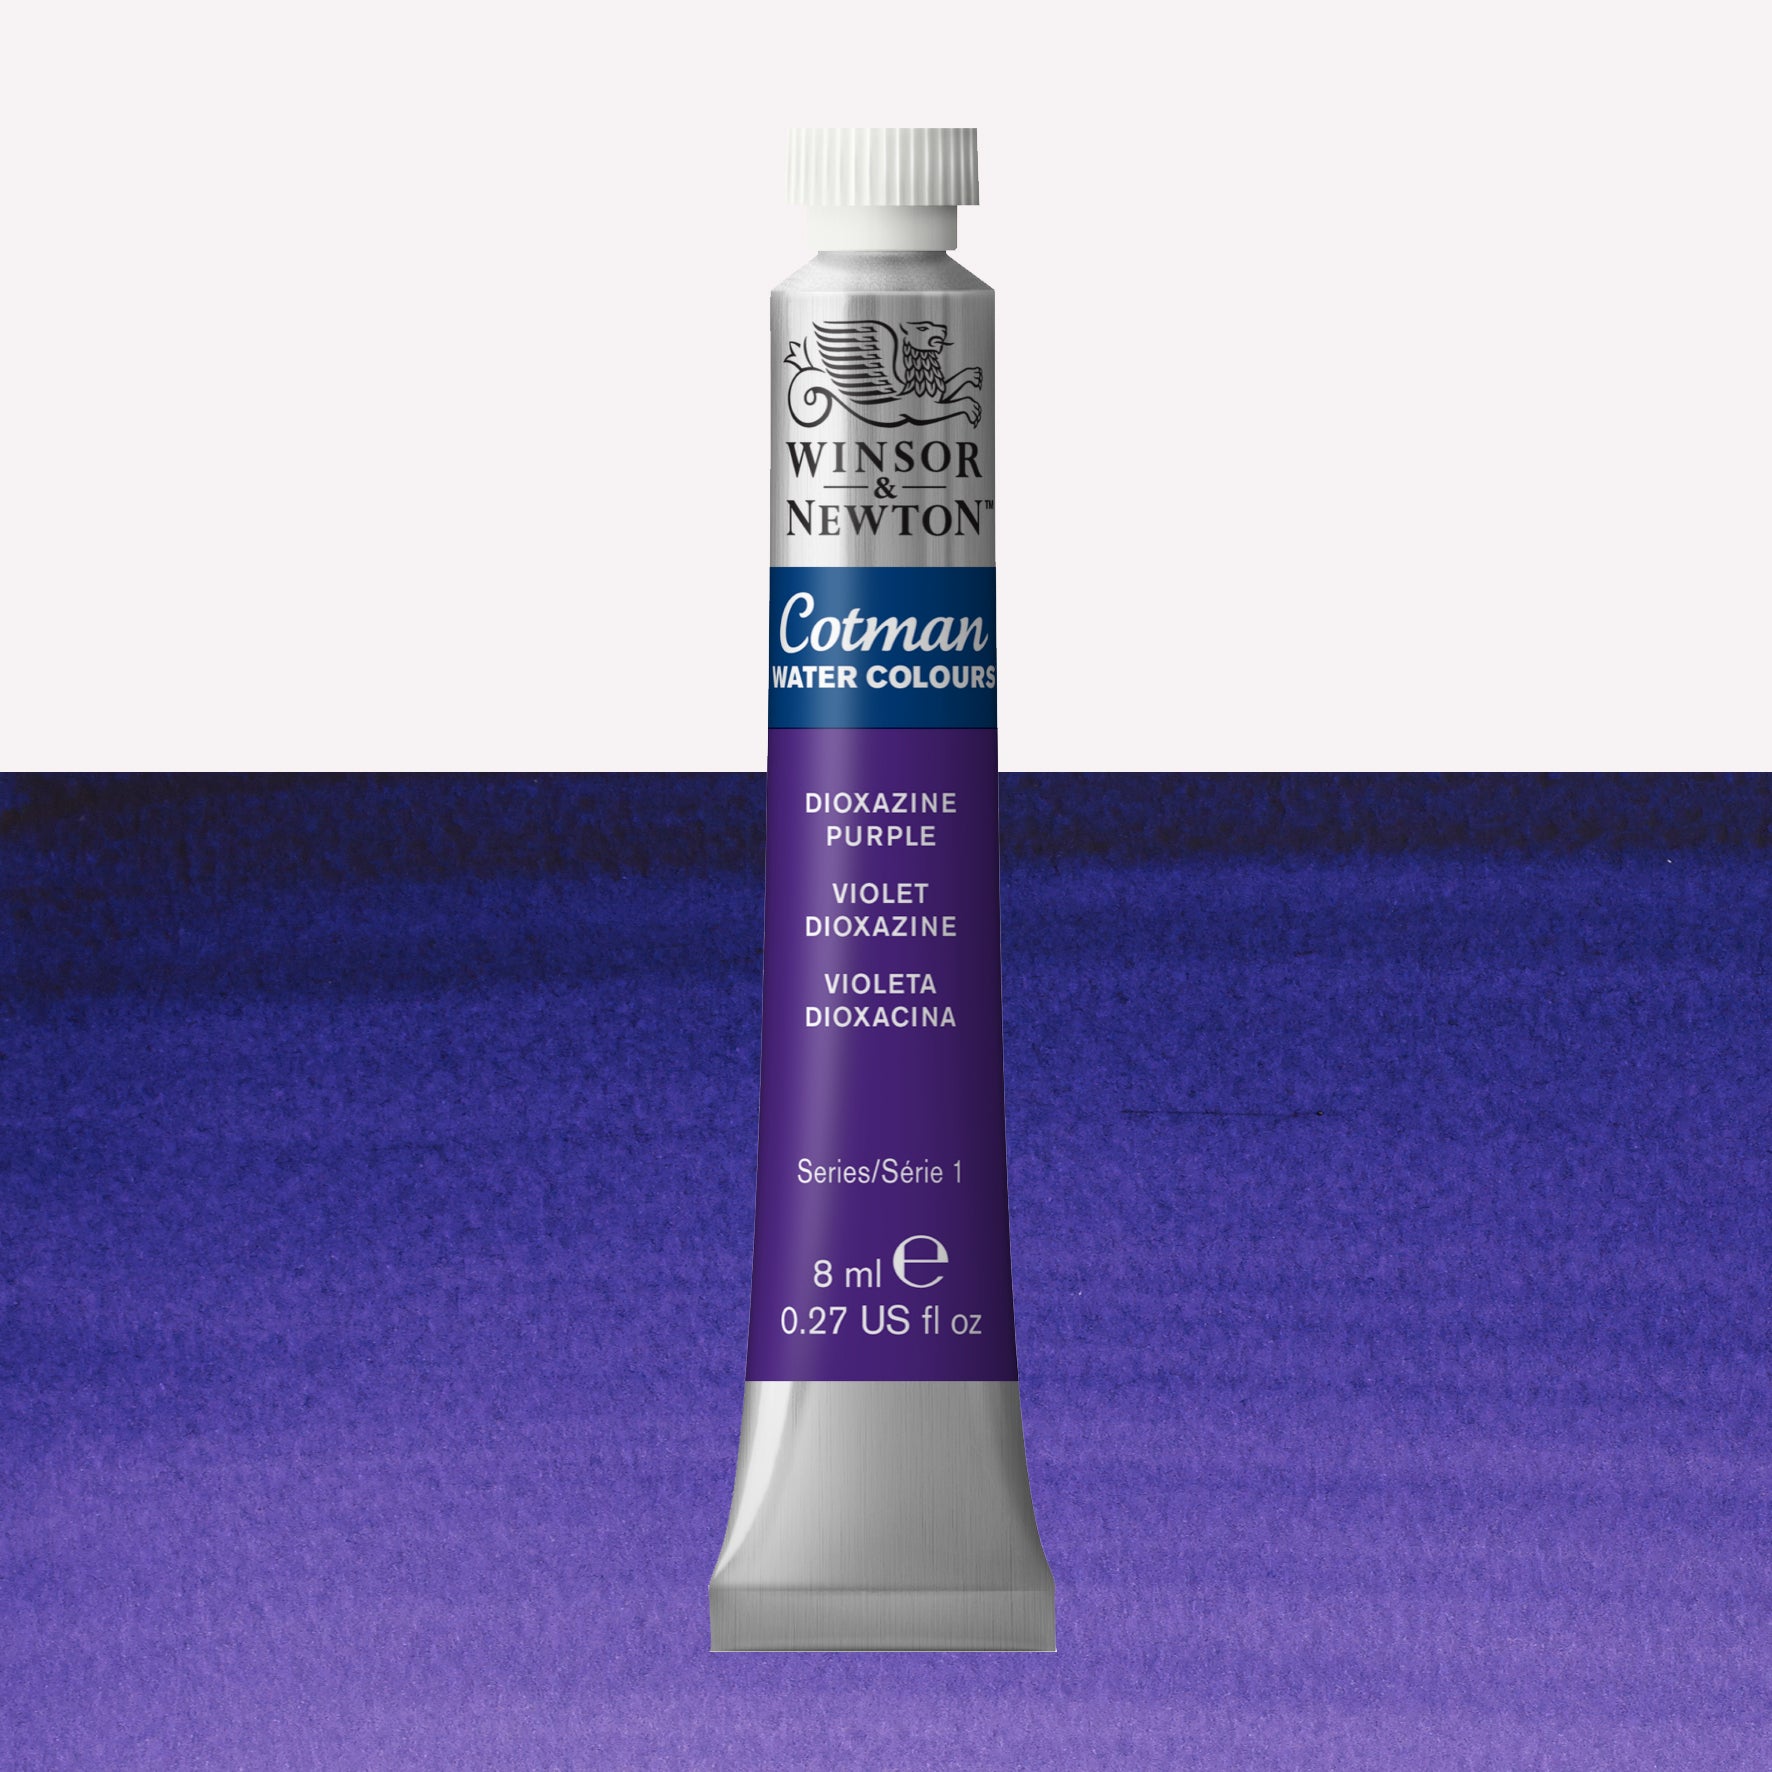 Winsor & Newton Cotman watercolour paint packaged in 8ml silver tubes with a white lid in the shade Dioxazine Purple over a highly pigmented colour swatch.